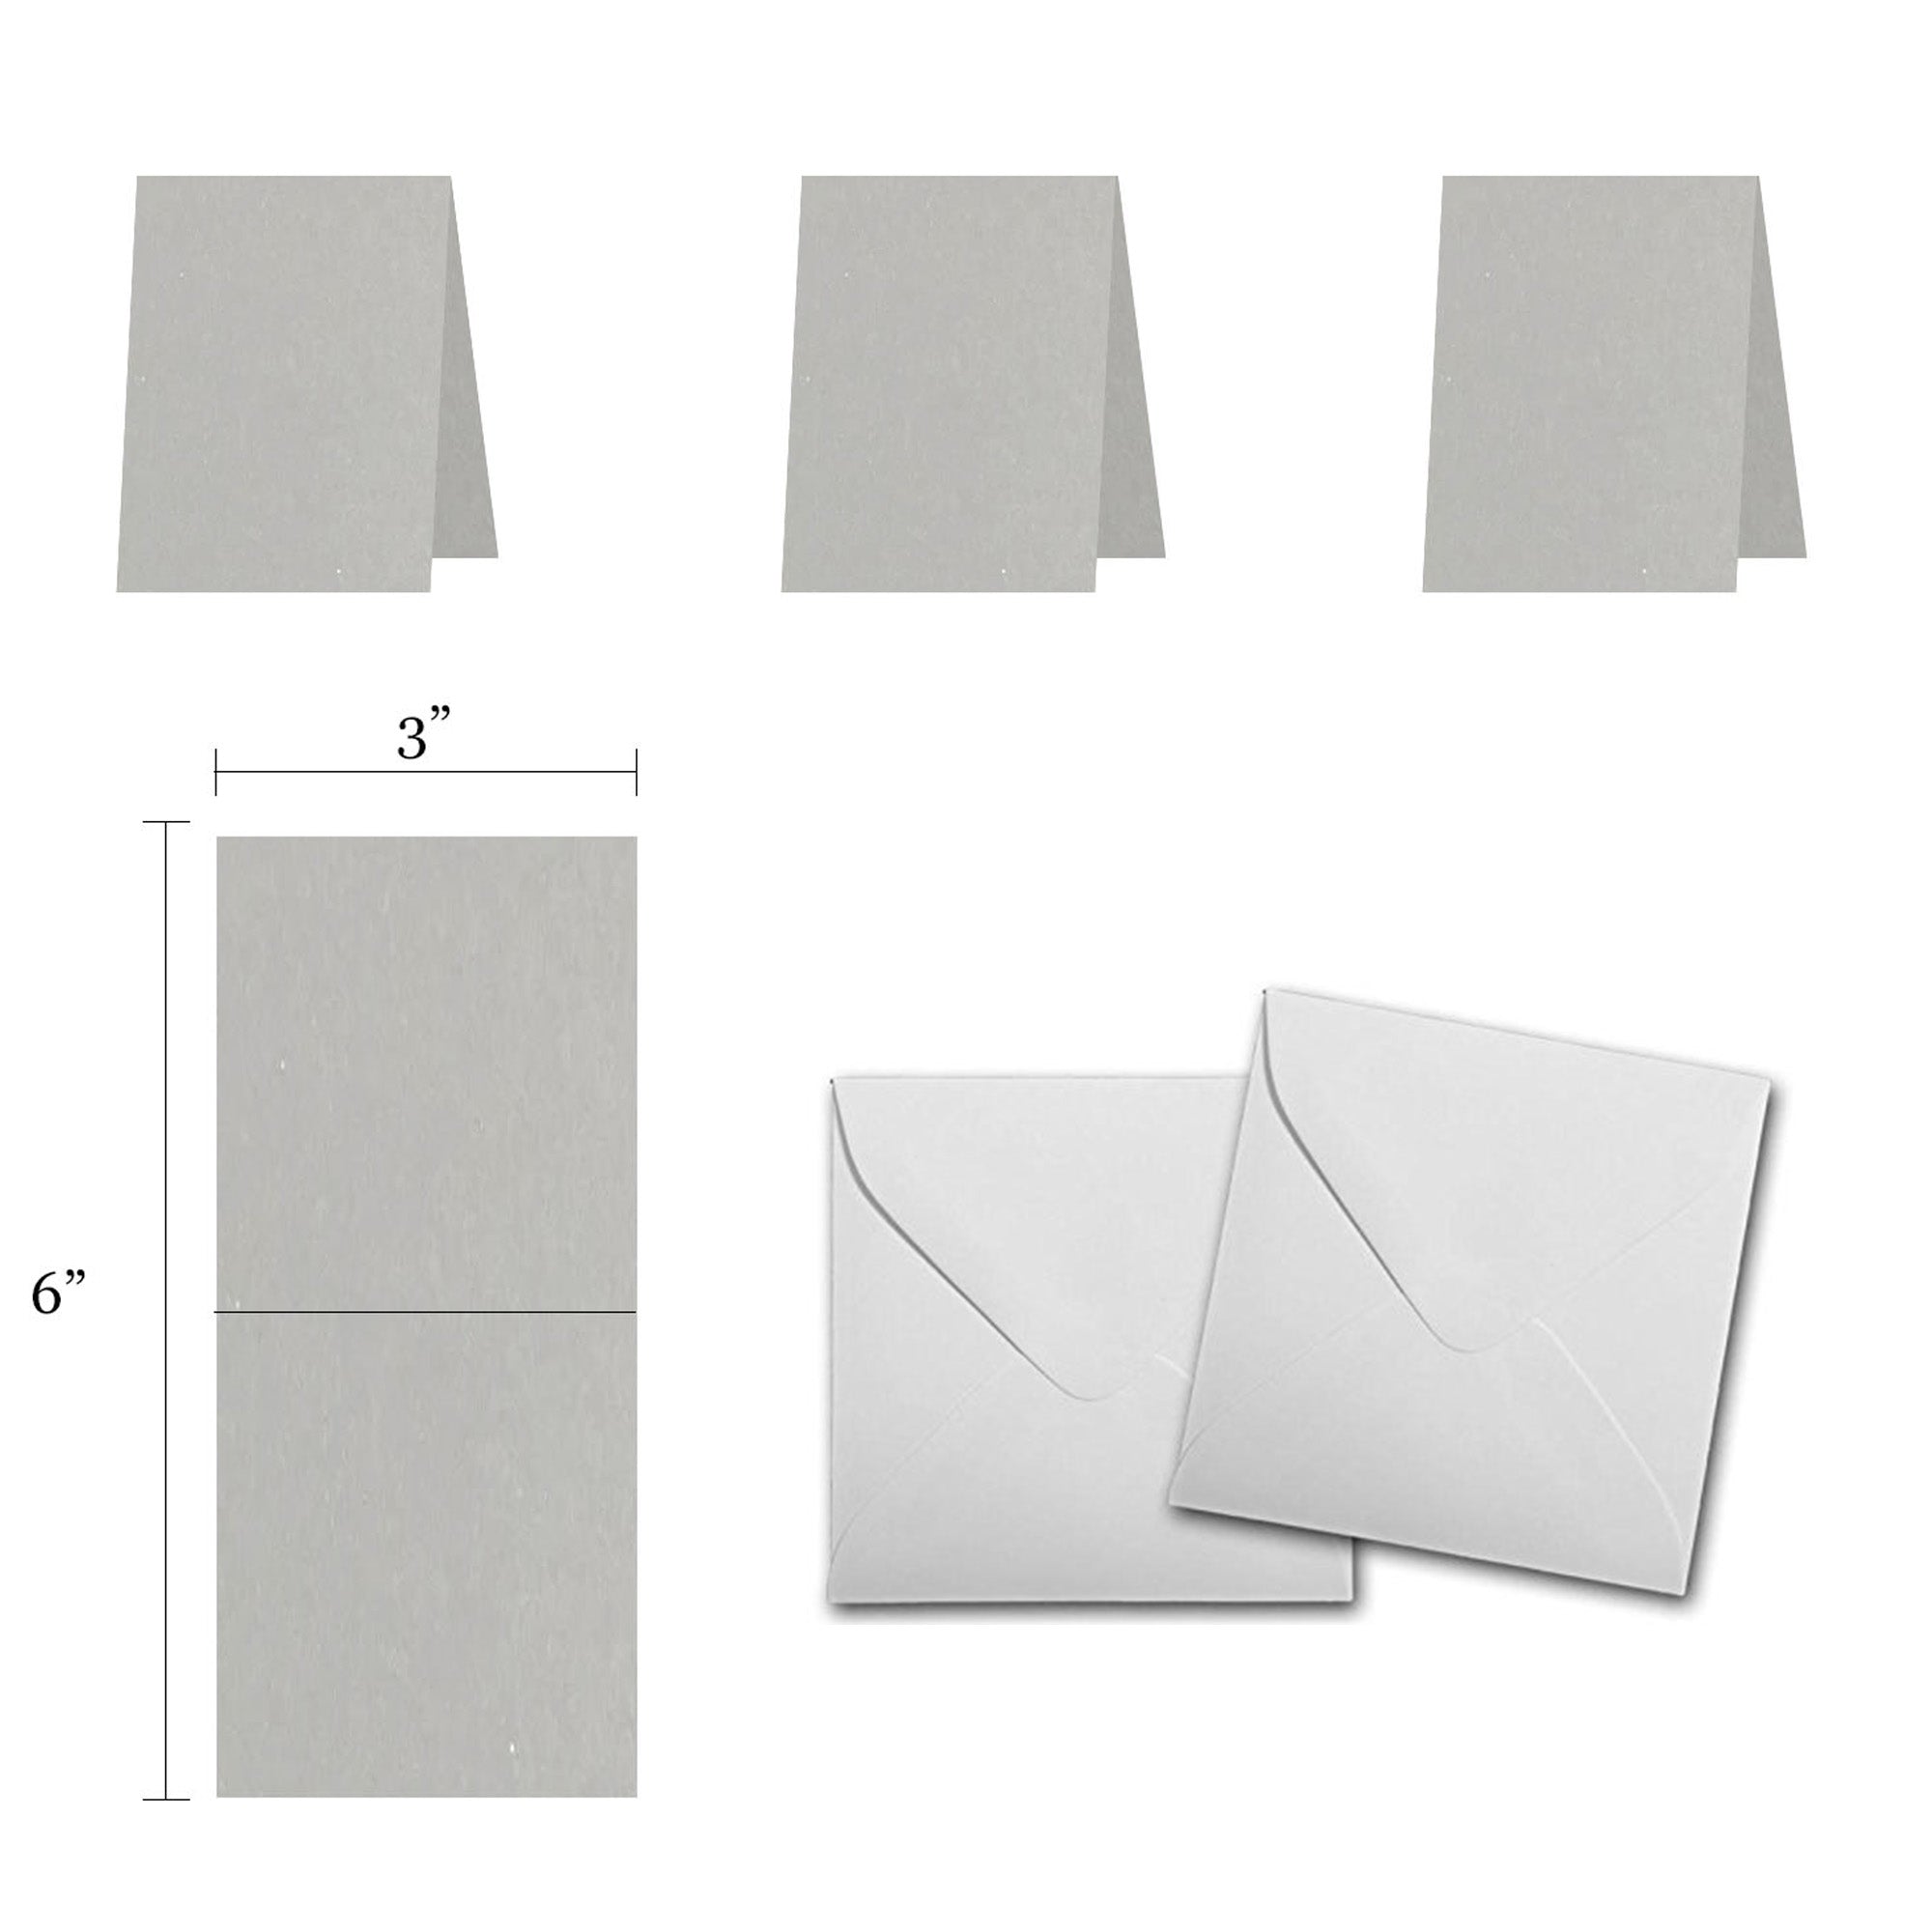 50 Pack Blank White Cards with Envelopes 4x6 Inch Folded Greeting